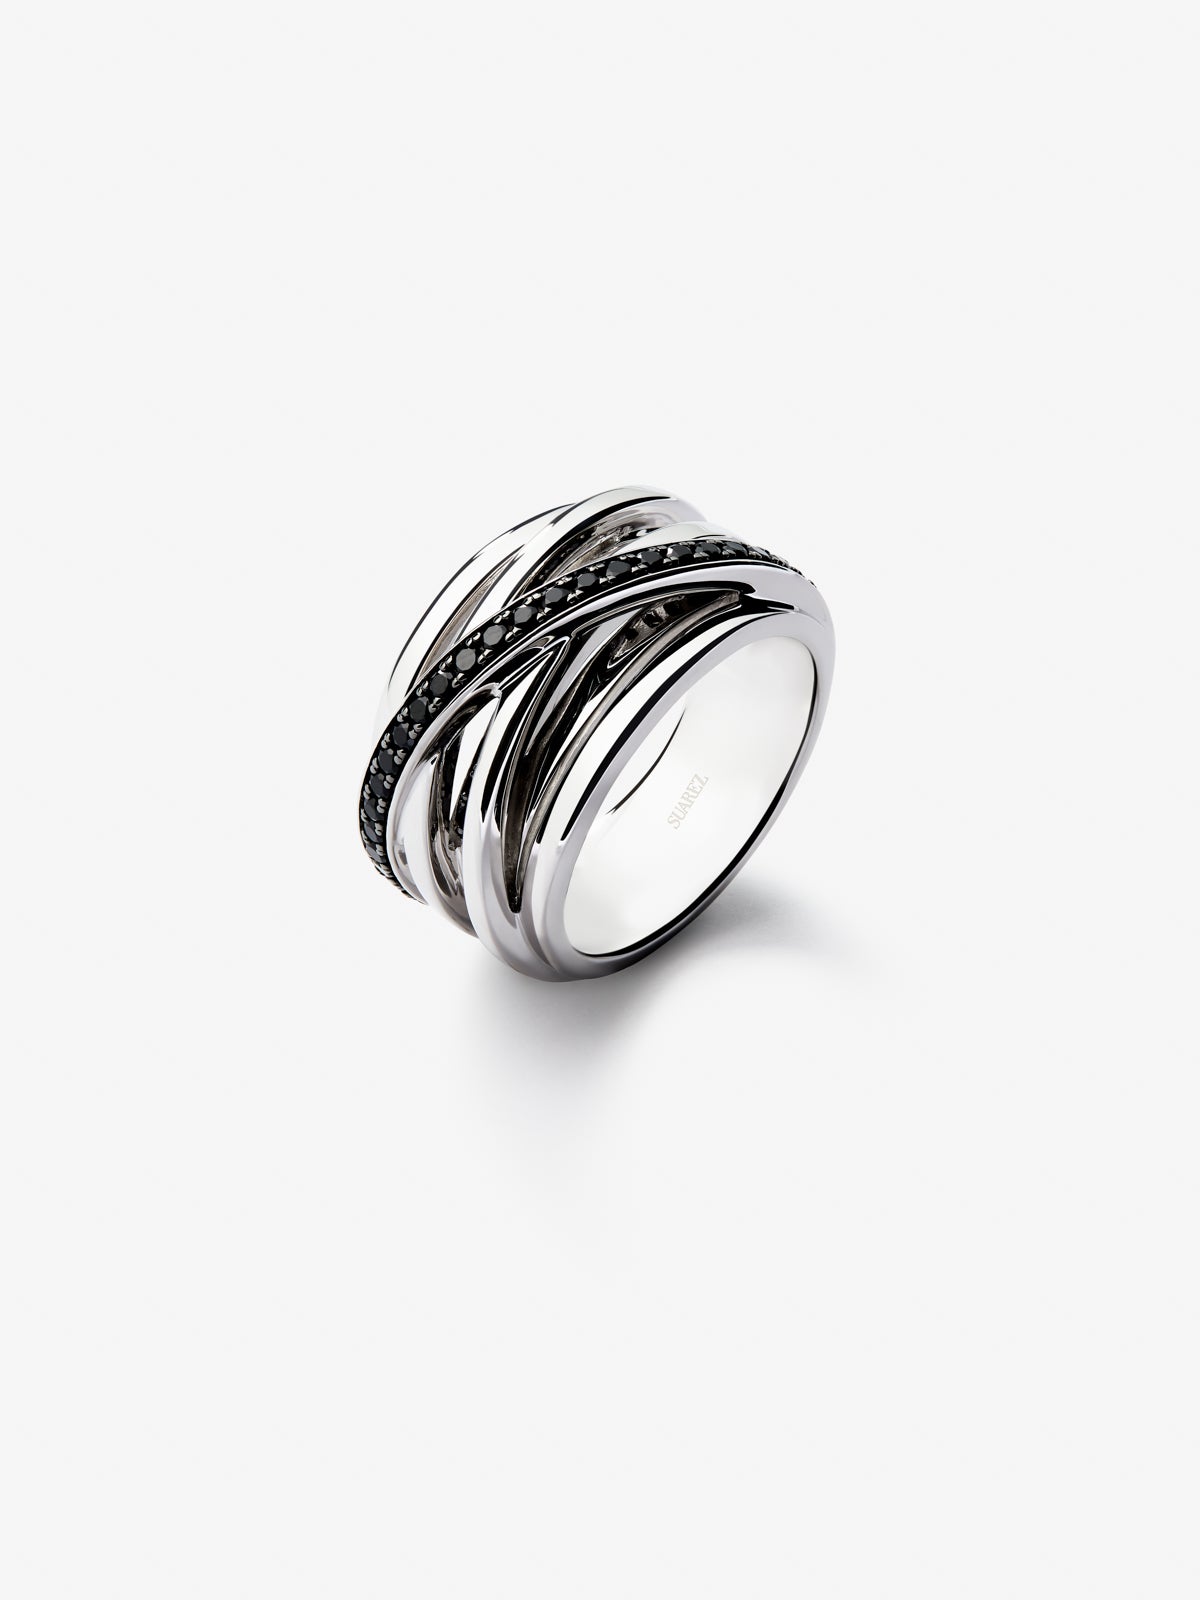 Cross multi-arm ring in 925 silver with 36 brilliant-cut black spinels with a total of 0.54 cts